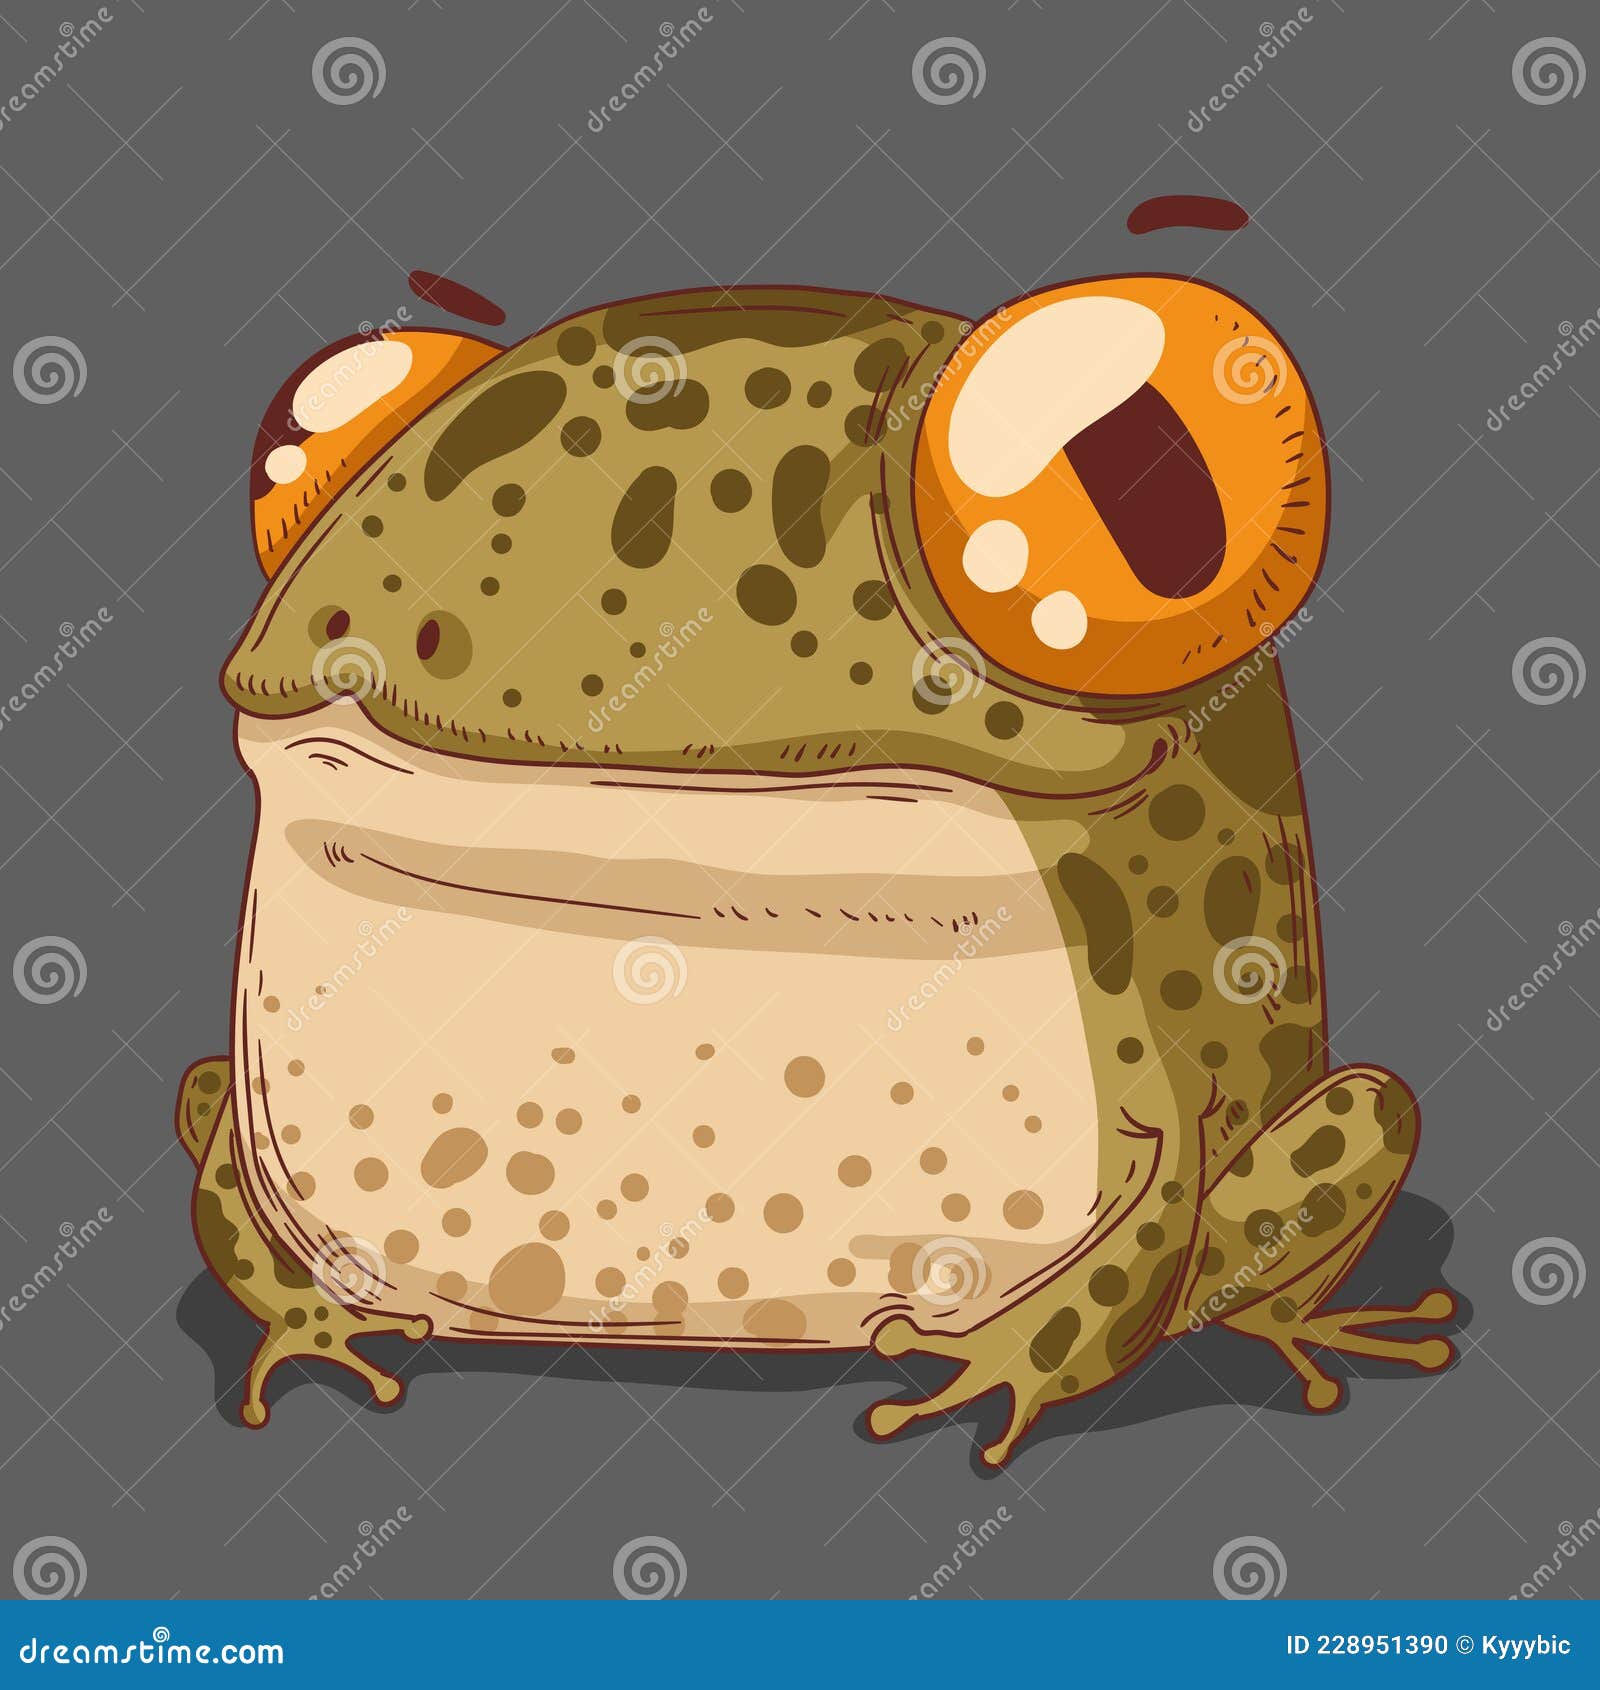 Small frog in the forest stock vector. Illustration of chip - 228951390